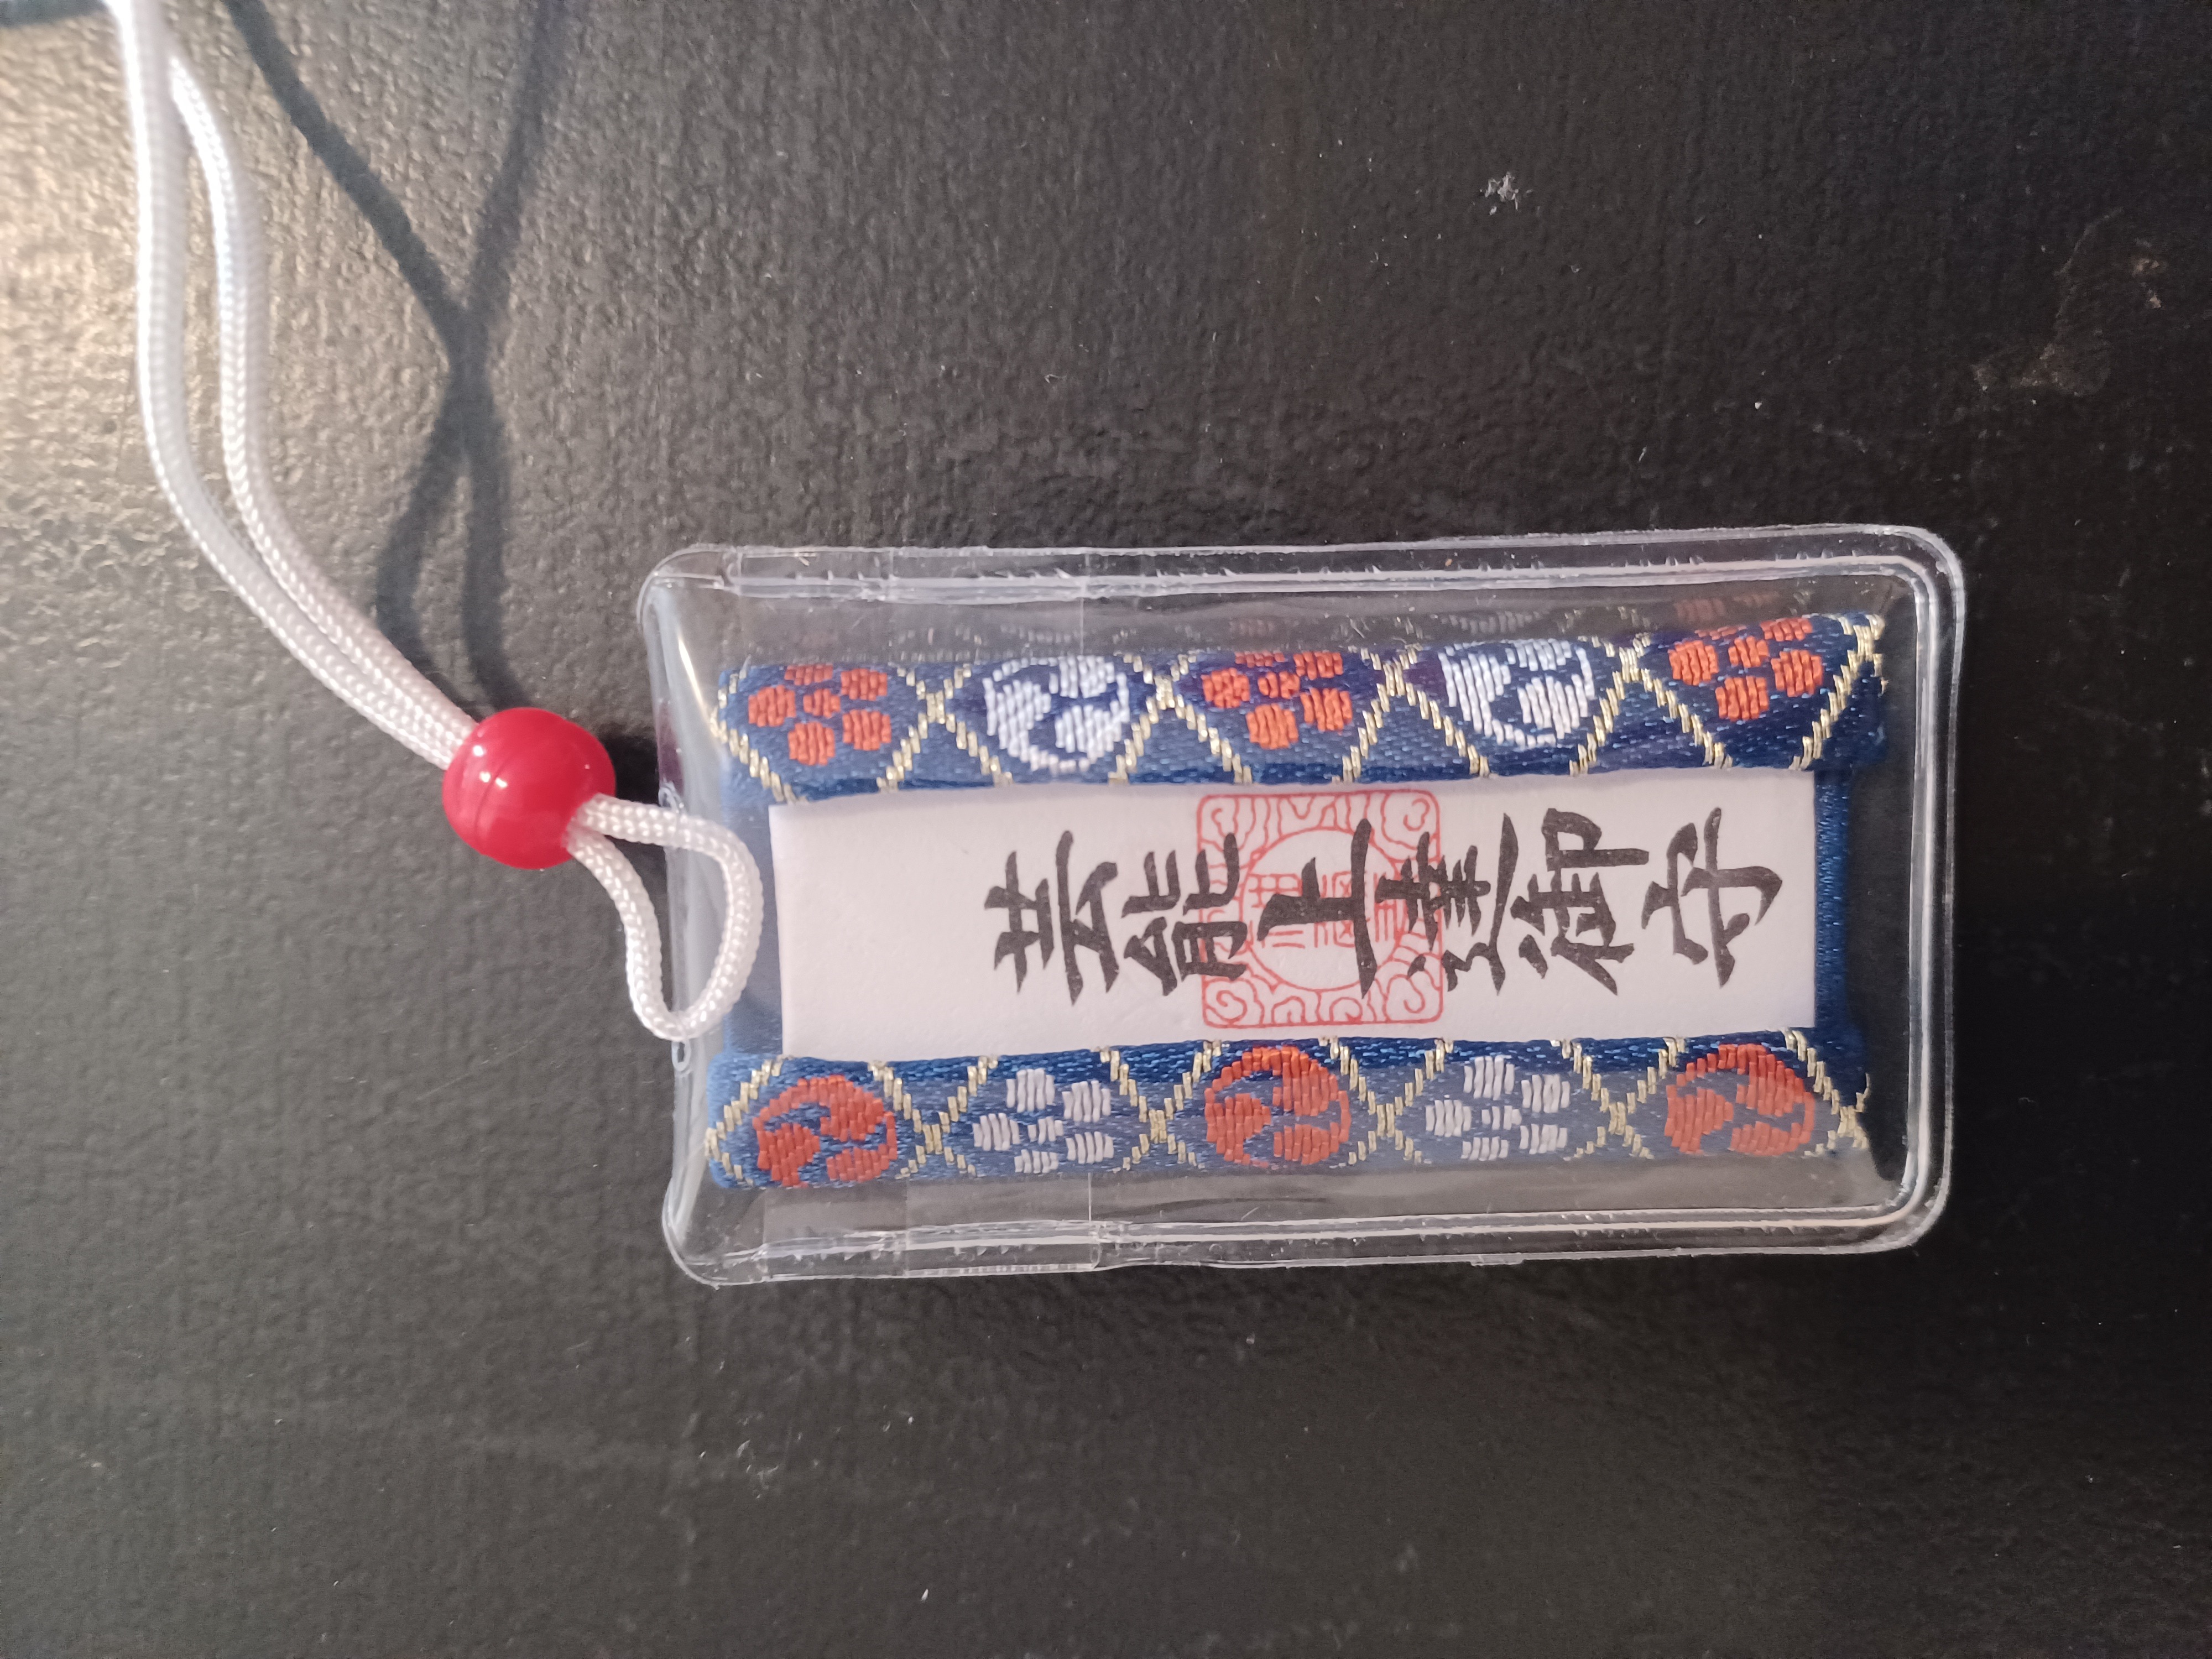 A blue/red/white lucky charm with Japanese symbols in the middle, and a white thread and red accessory at the top.